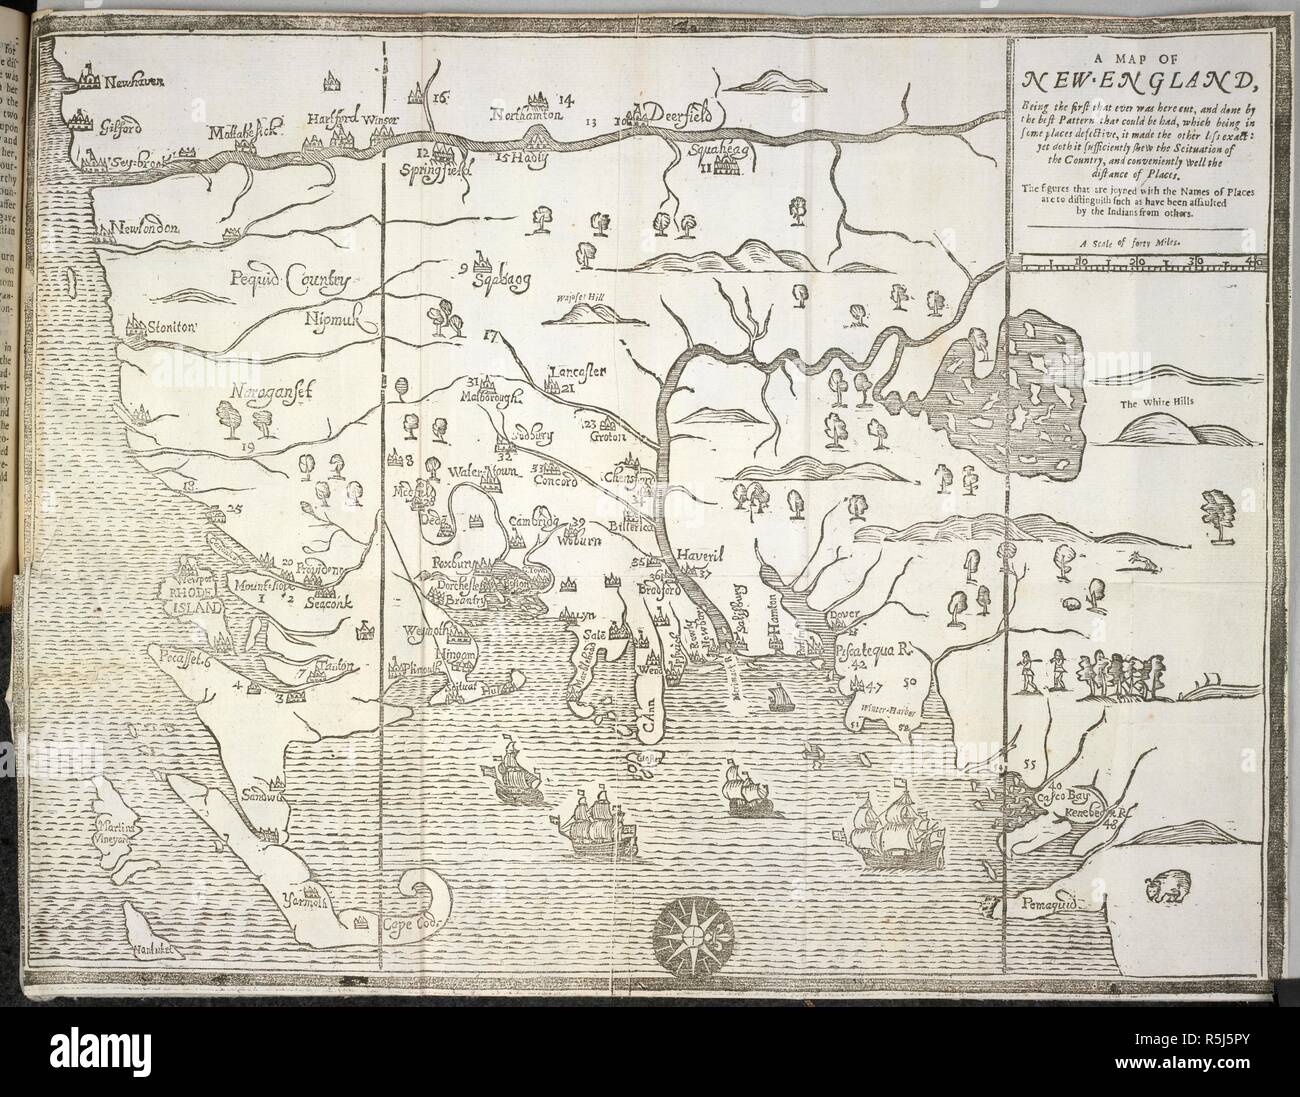 New England. A Map of New England, being the first that ever wa. Boston, 1677. A map of New England.  Image taken from A Map of New England, being the first that ever was here cut A scale of forty miles[ = 71 mm]..  Originally published/produced in Boston, 1677. . Source: G.7146,. Language: English. Stock Photo